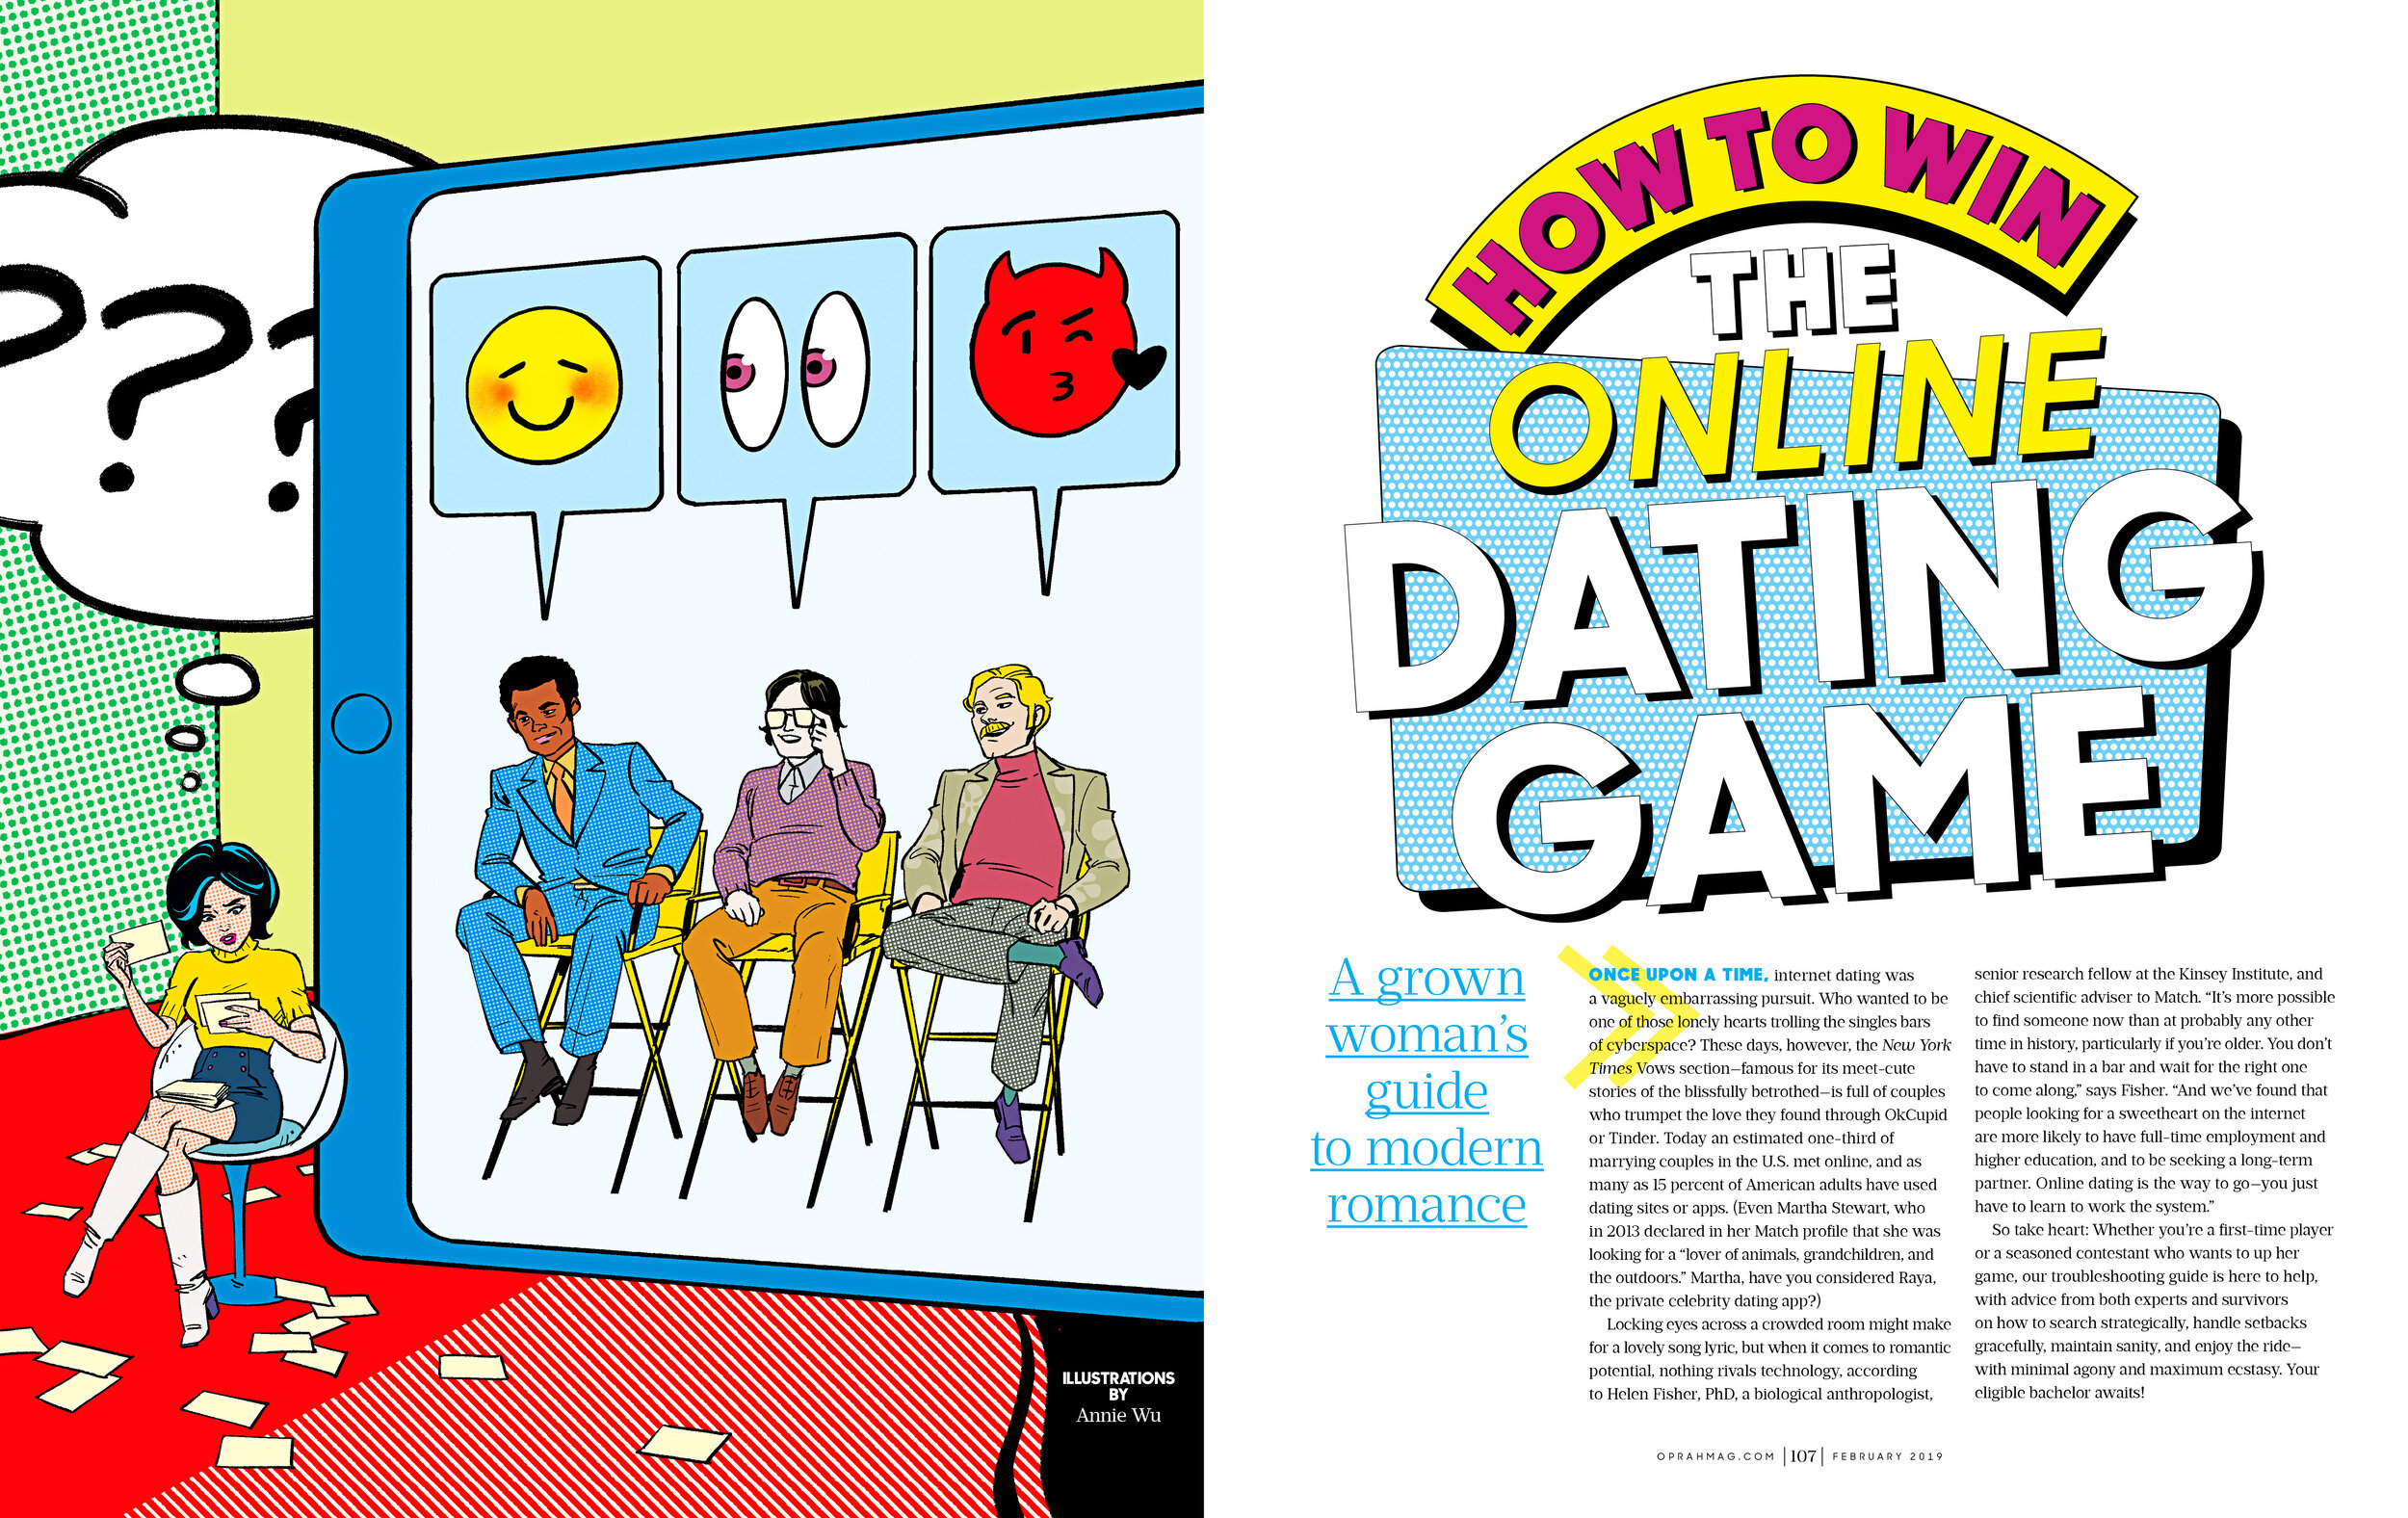 "How to win the online dating game"